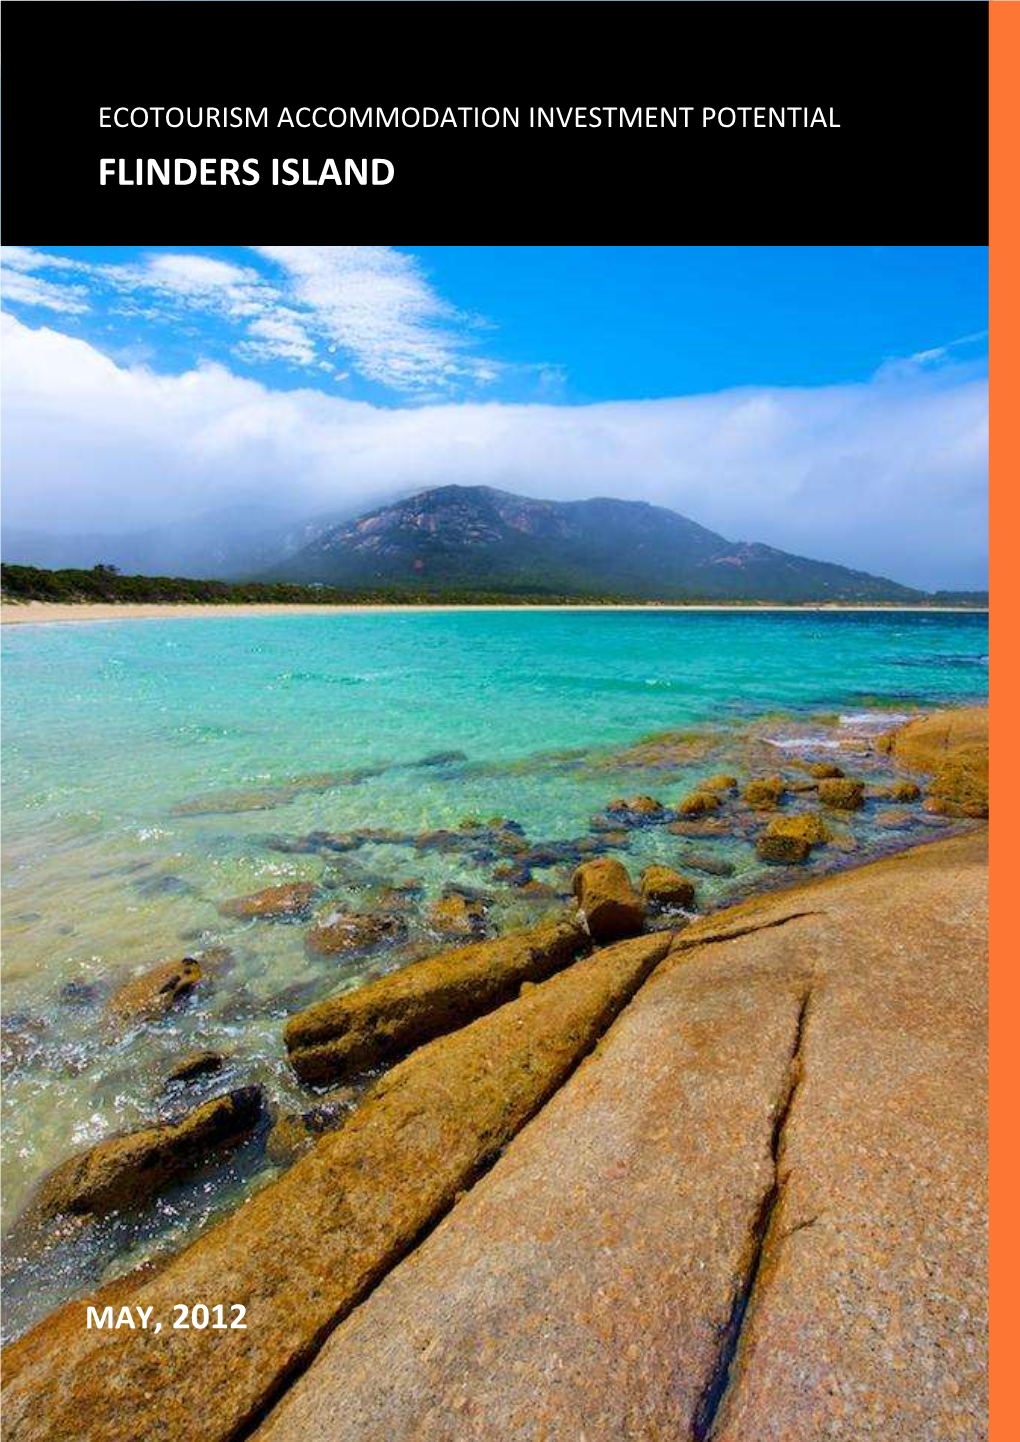 Ecotourism Accommodation Investment Potential Flinders Island